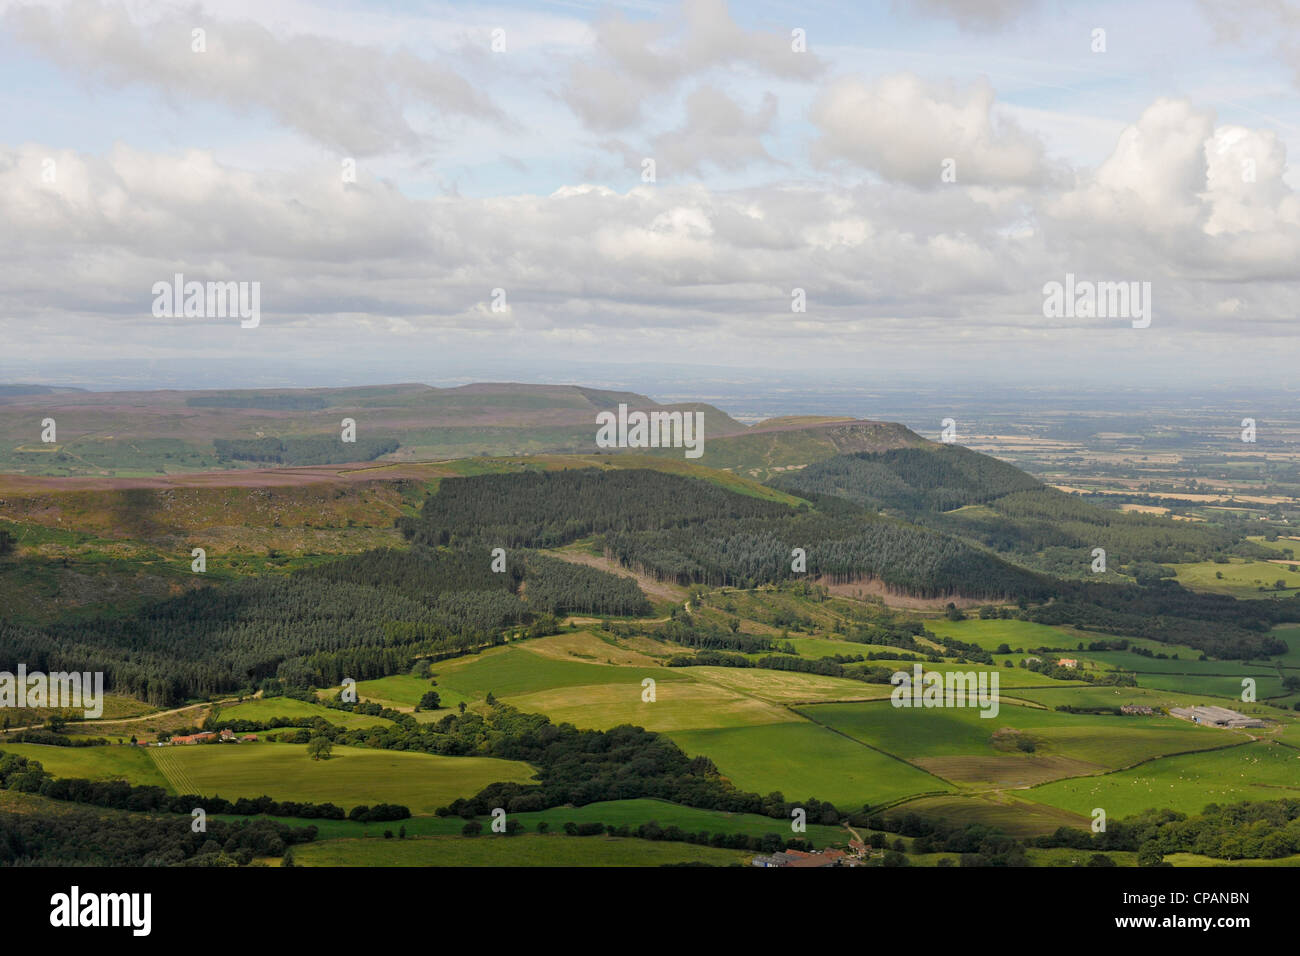 Aerial View of hills on the edge of the North yorkshire Moors National Park Stock Photo